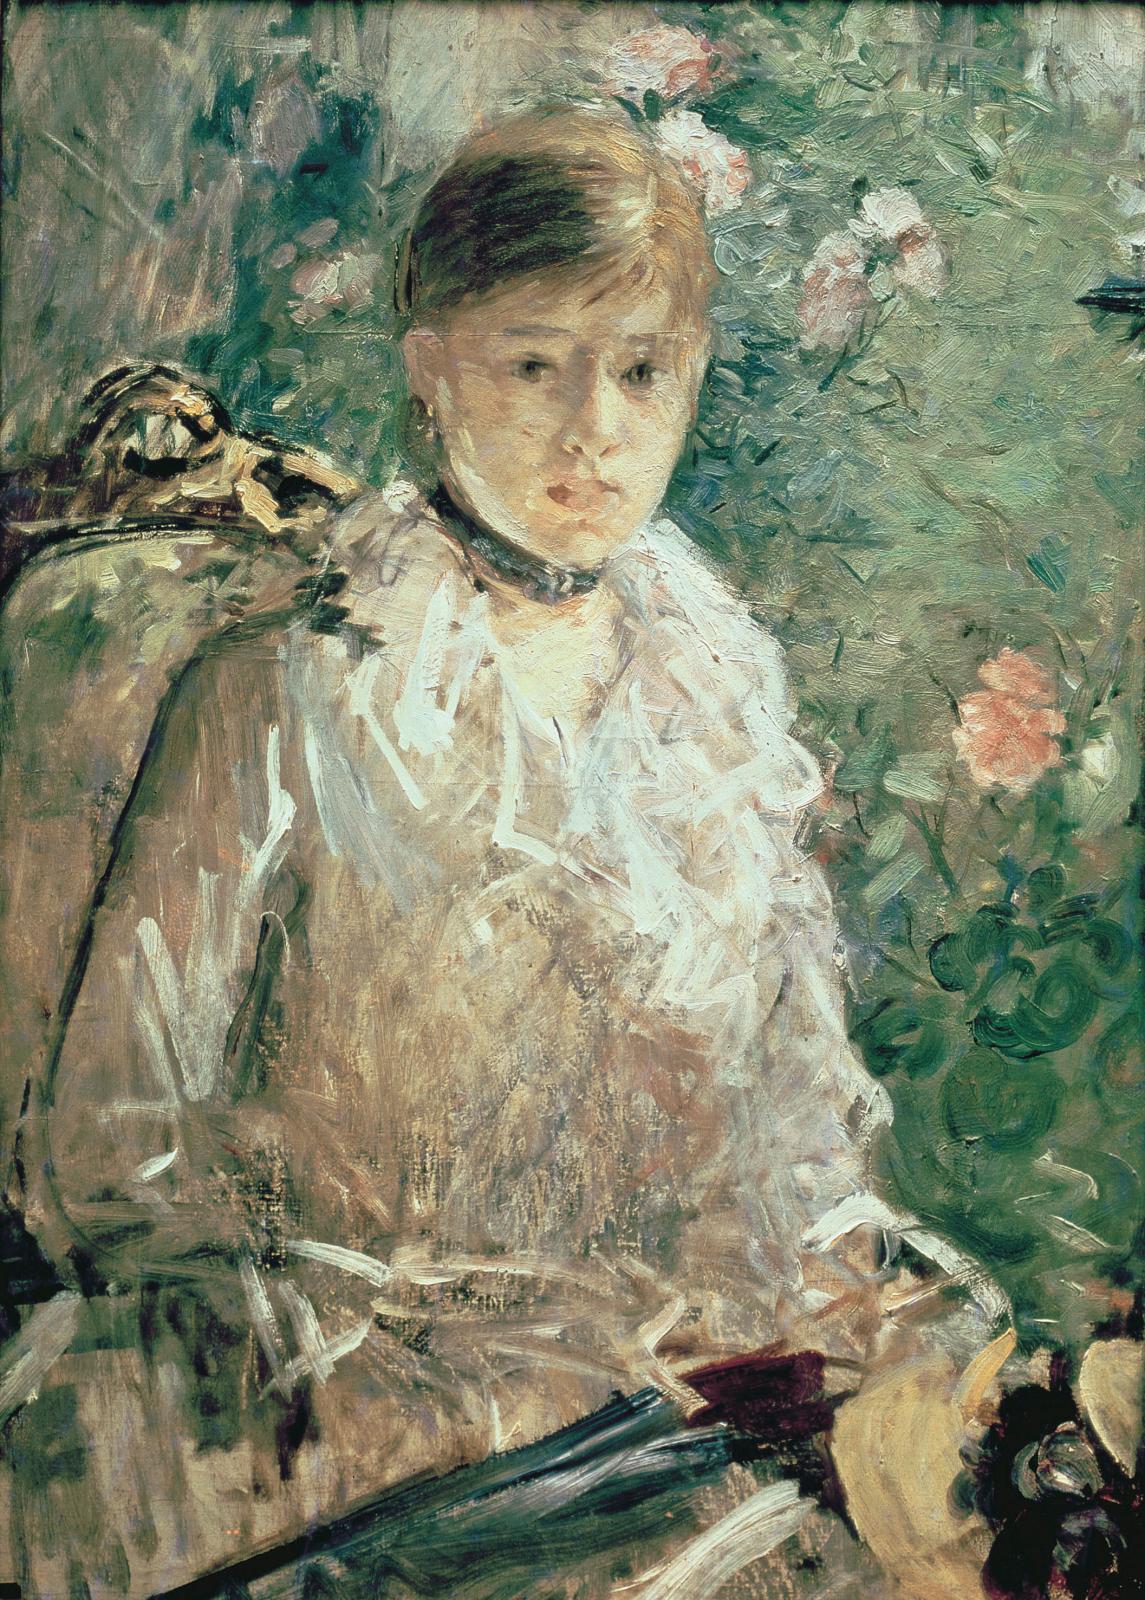  Berthe Morisot: From Obscurity to Light